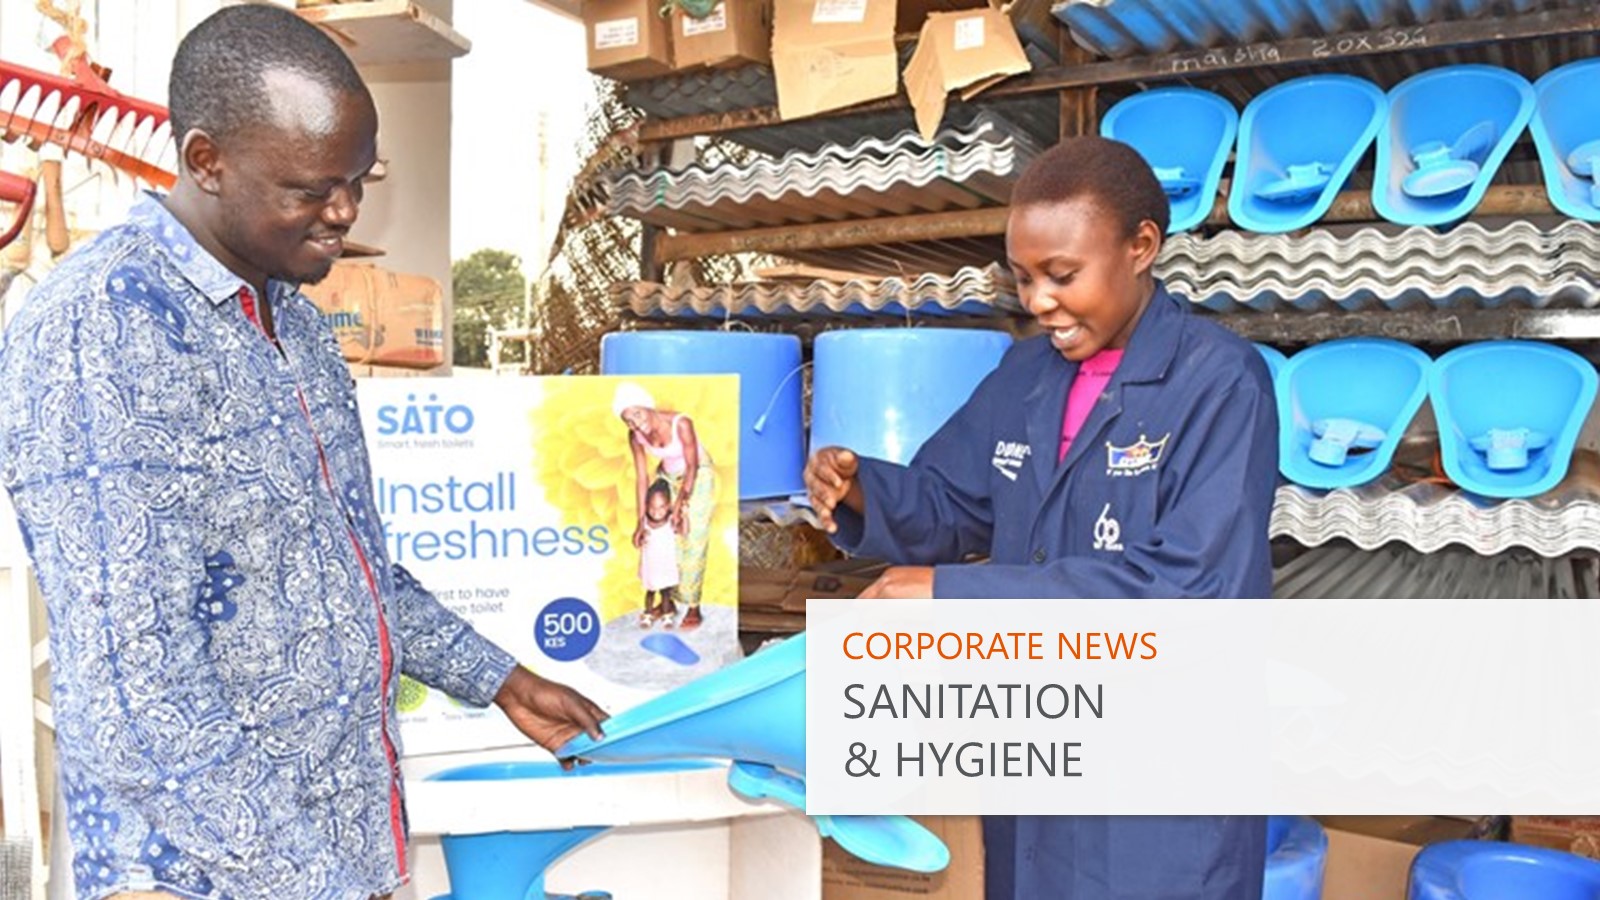 LIXIL and USAID jointly launch Partnership for Better Living to accelerate global access to improved sanitation and hygiene サムネイル画像